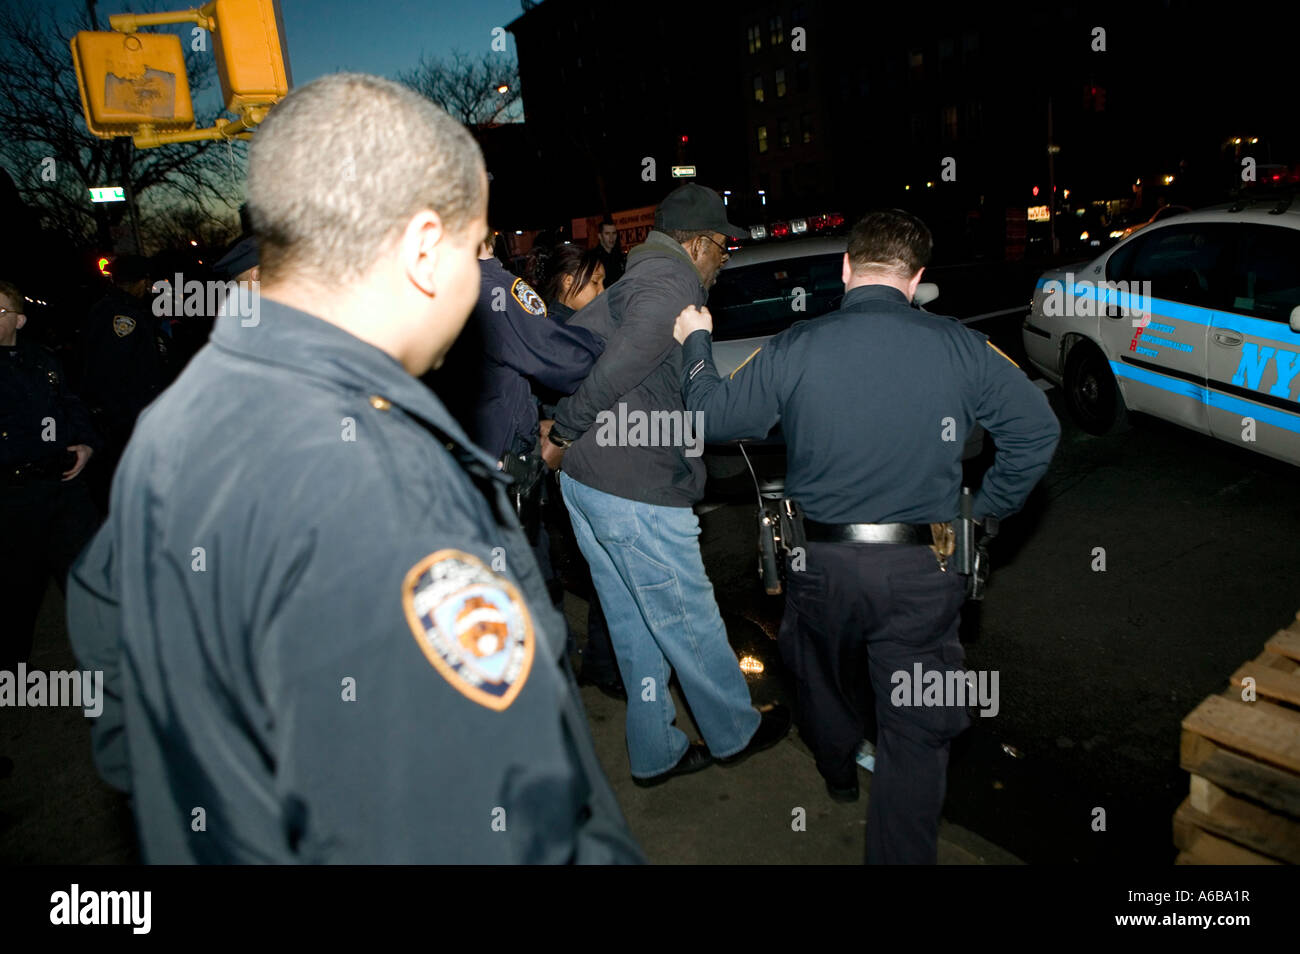 NYPD police officers arrest a man in New York Cty USA Dec 2006 Stock Photo